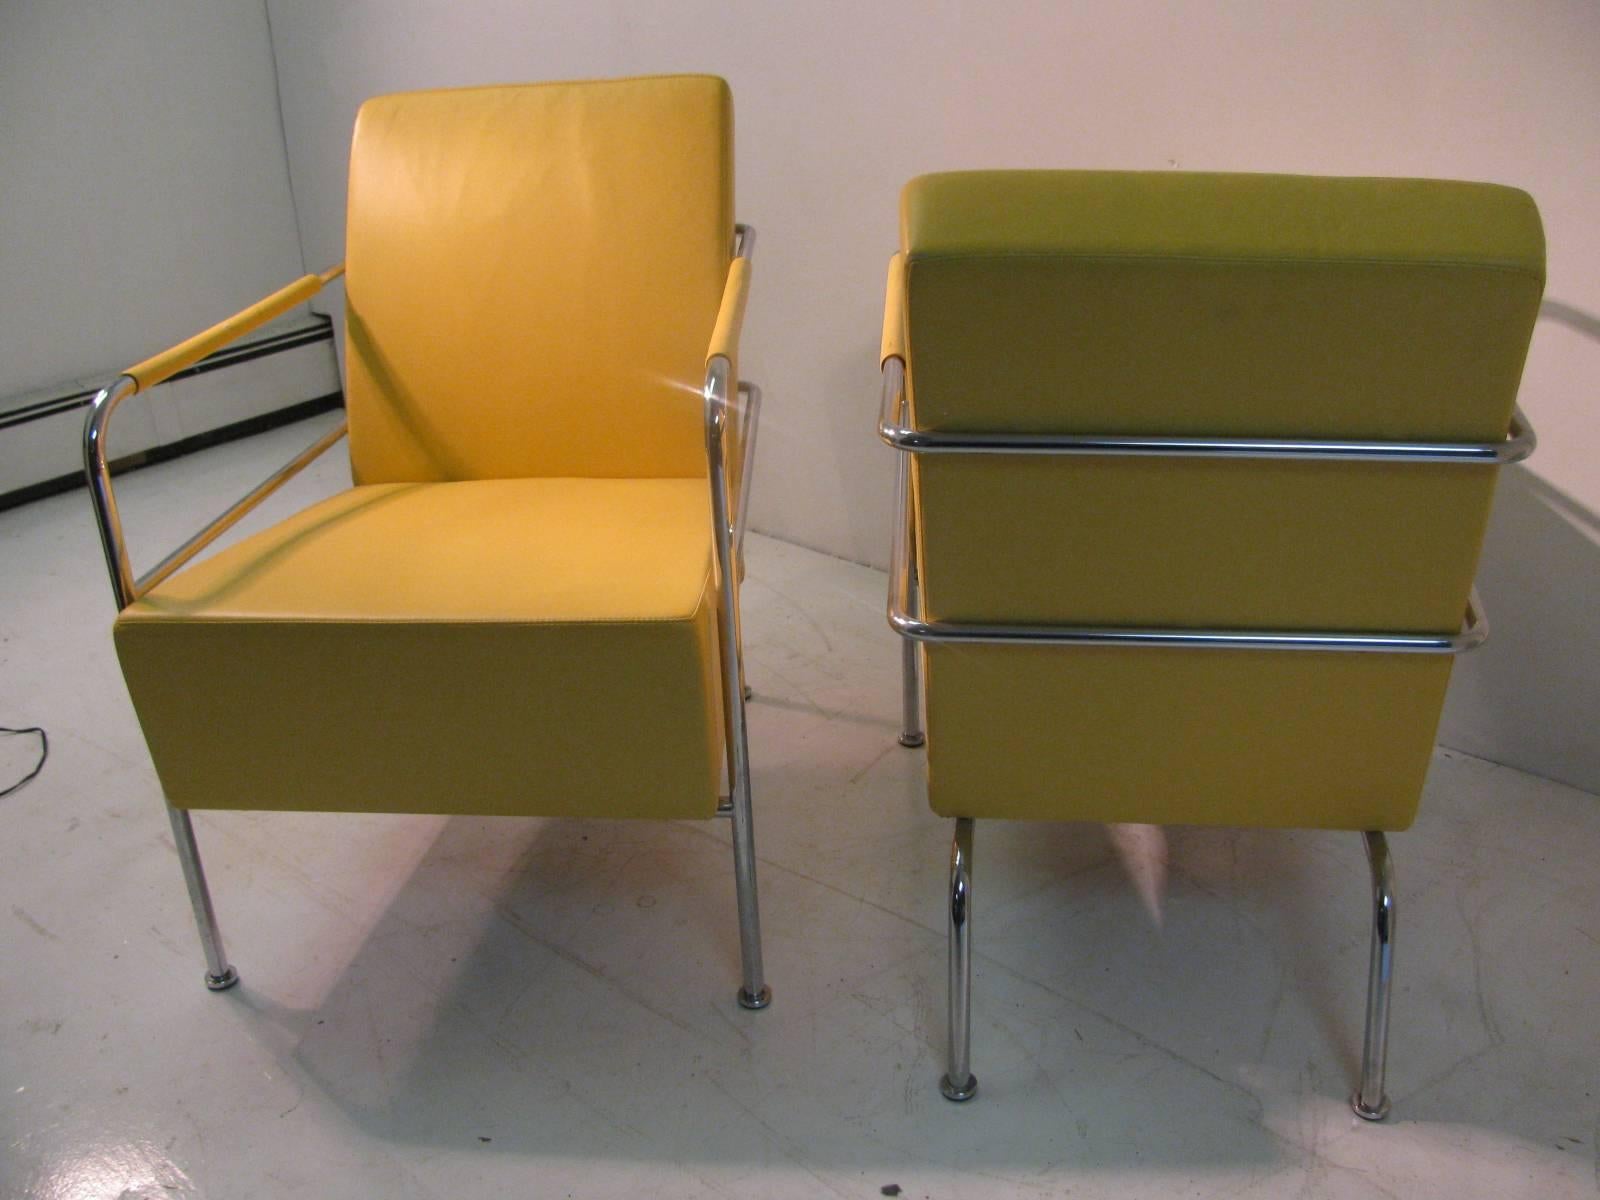 Fabulous Pair of Mid-Century Modern Leather with Chrome Club Lounge Chairs 1